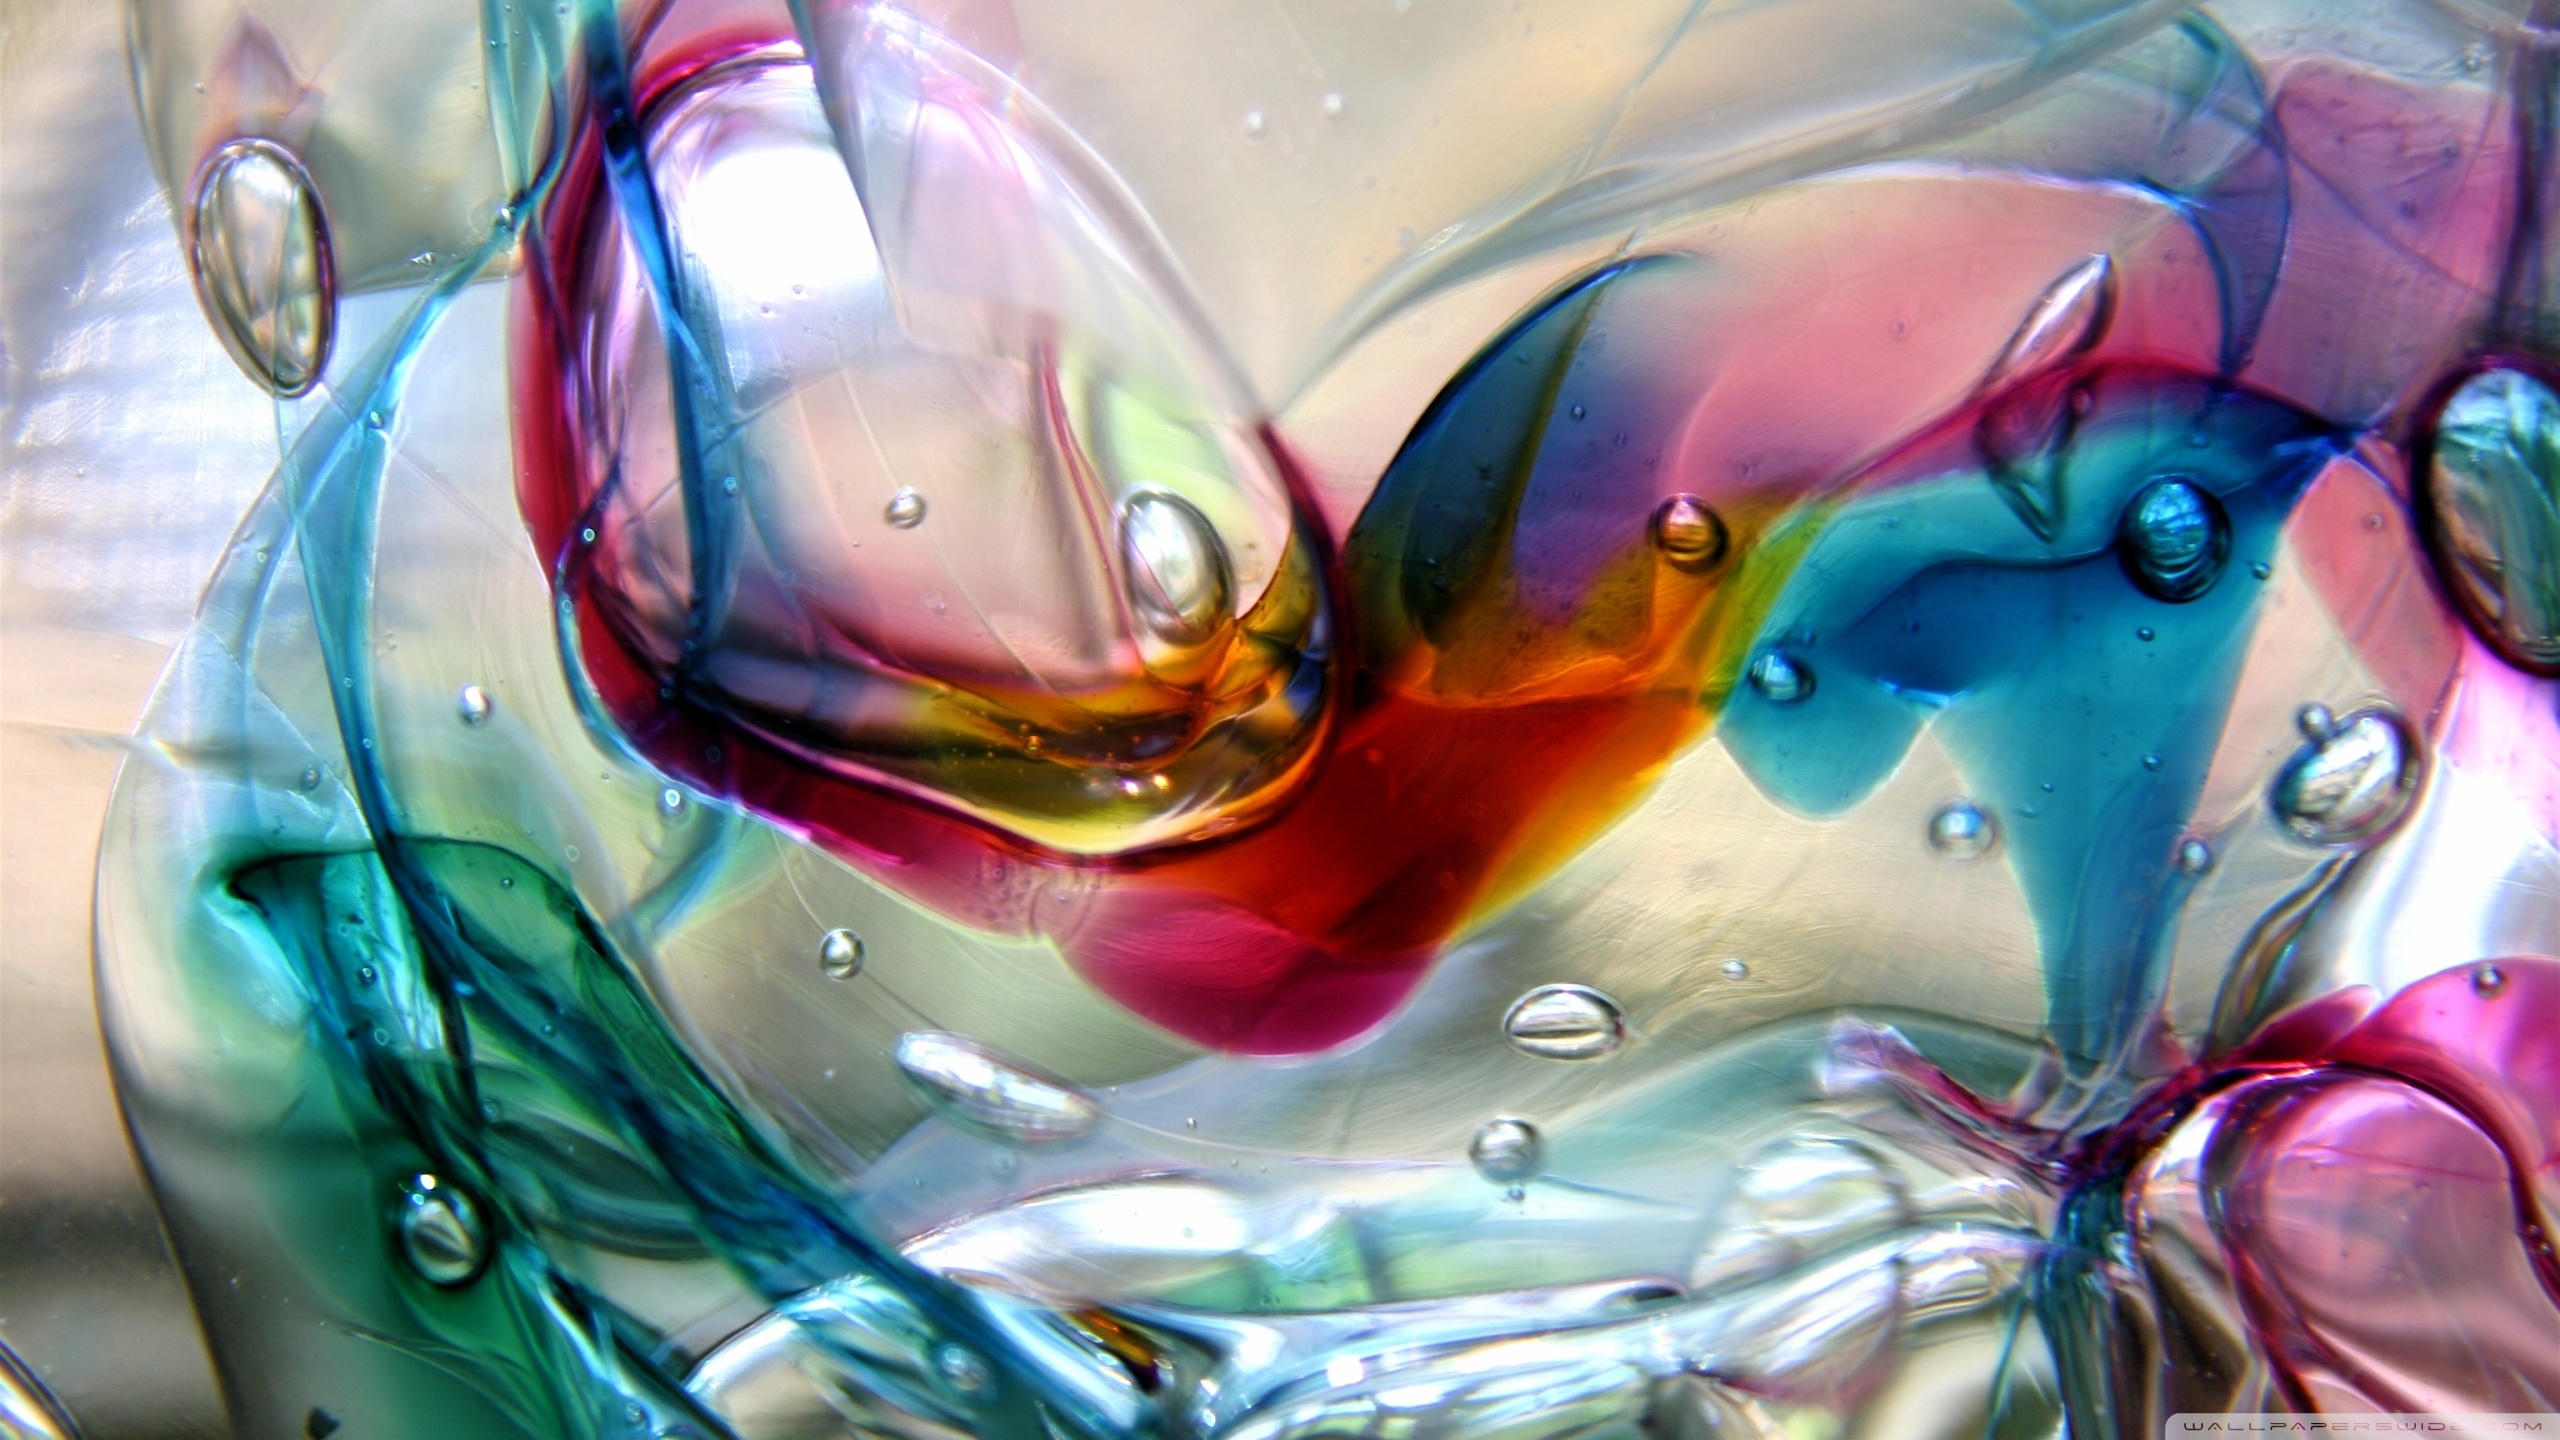 Hd Wallpaper For Mobile Water Bubbles